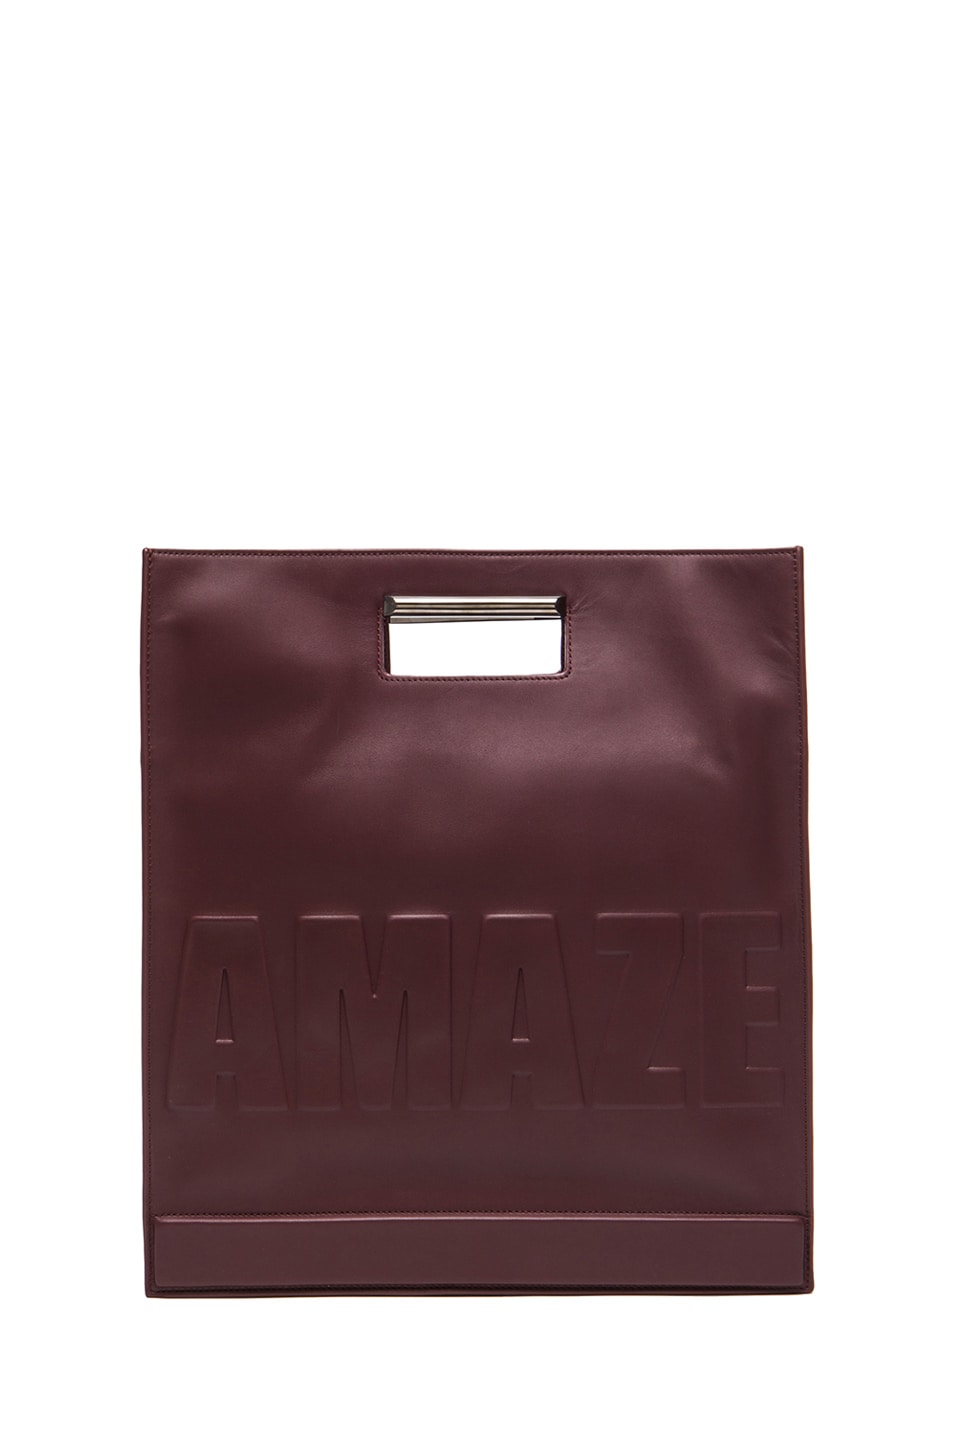 Image 1 of 3.1 phillip lim Totes Amaze Cut Out Handle Tote in Bordeaux & Gunmetal